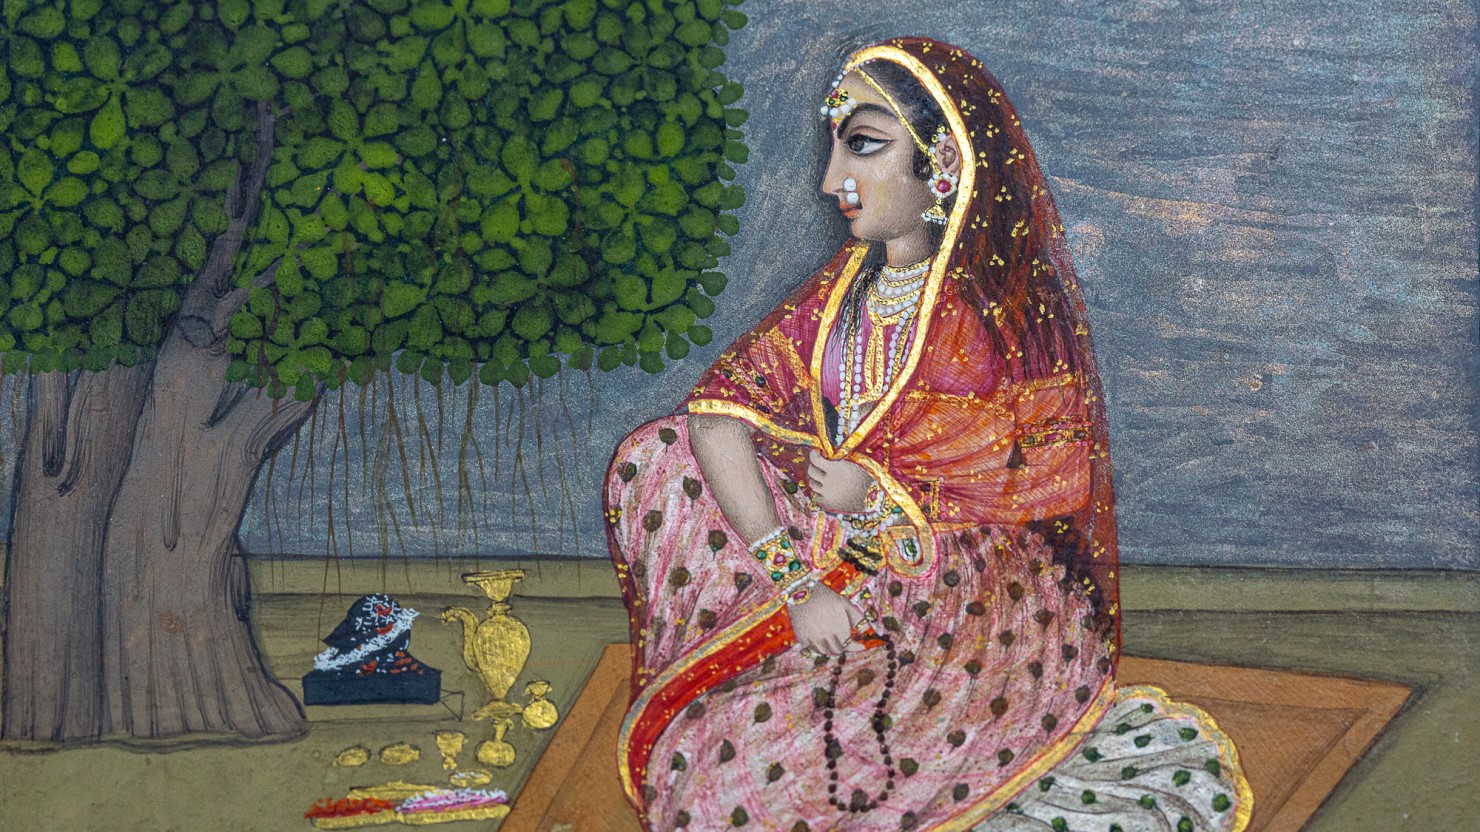 The importance of South Asian miniature painting